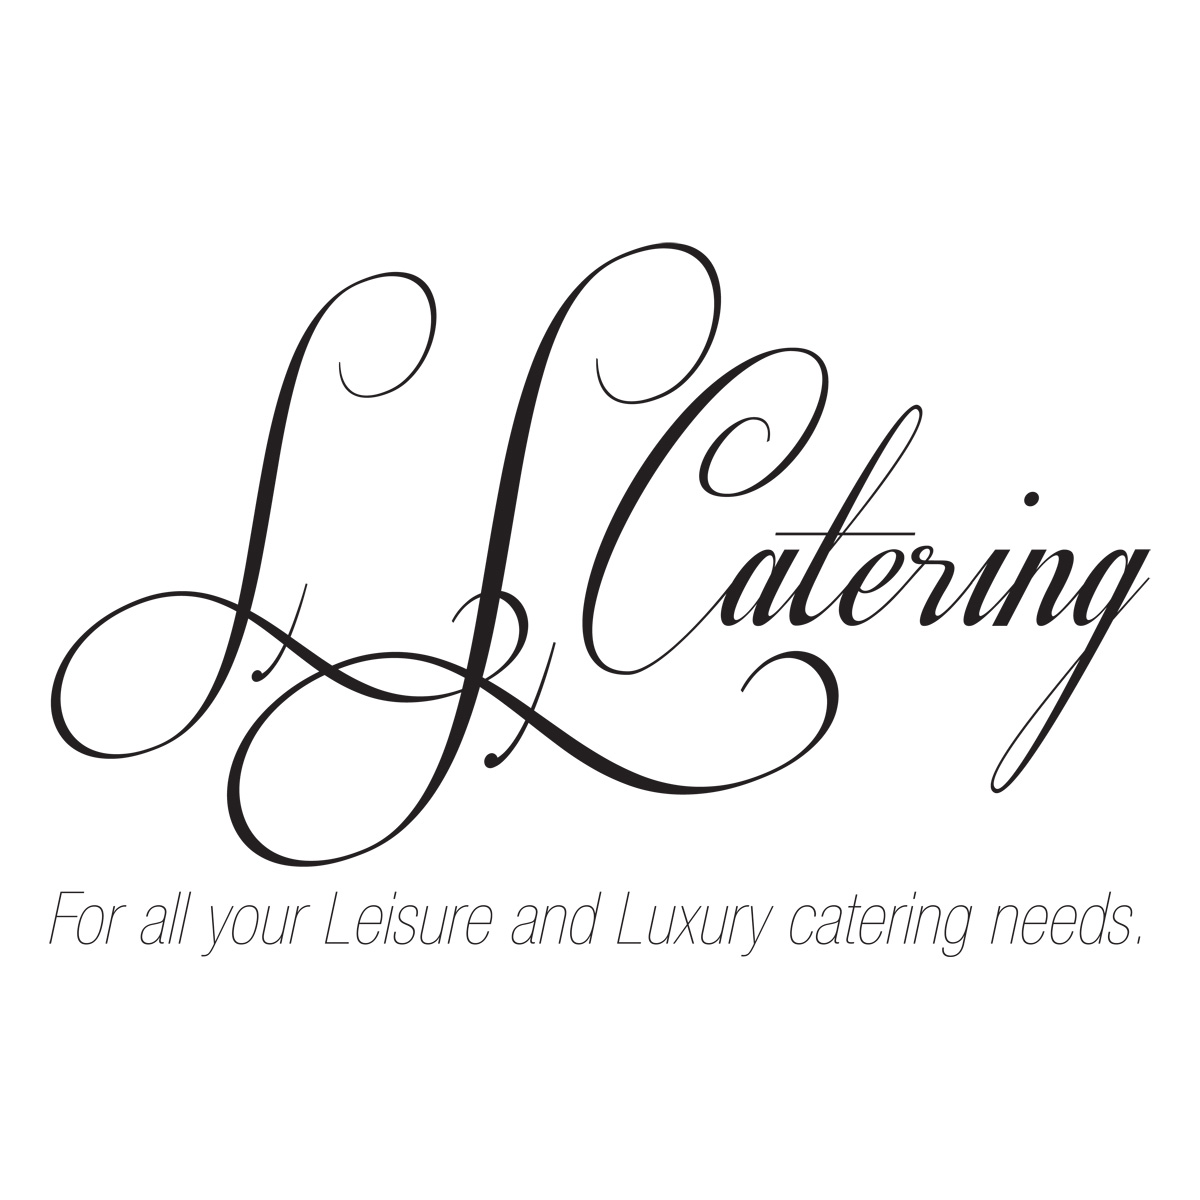 LL Catered Events | For all your Leisure and Luxury catering needs